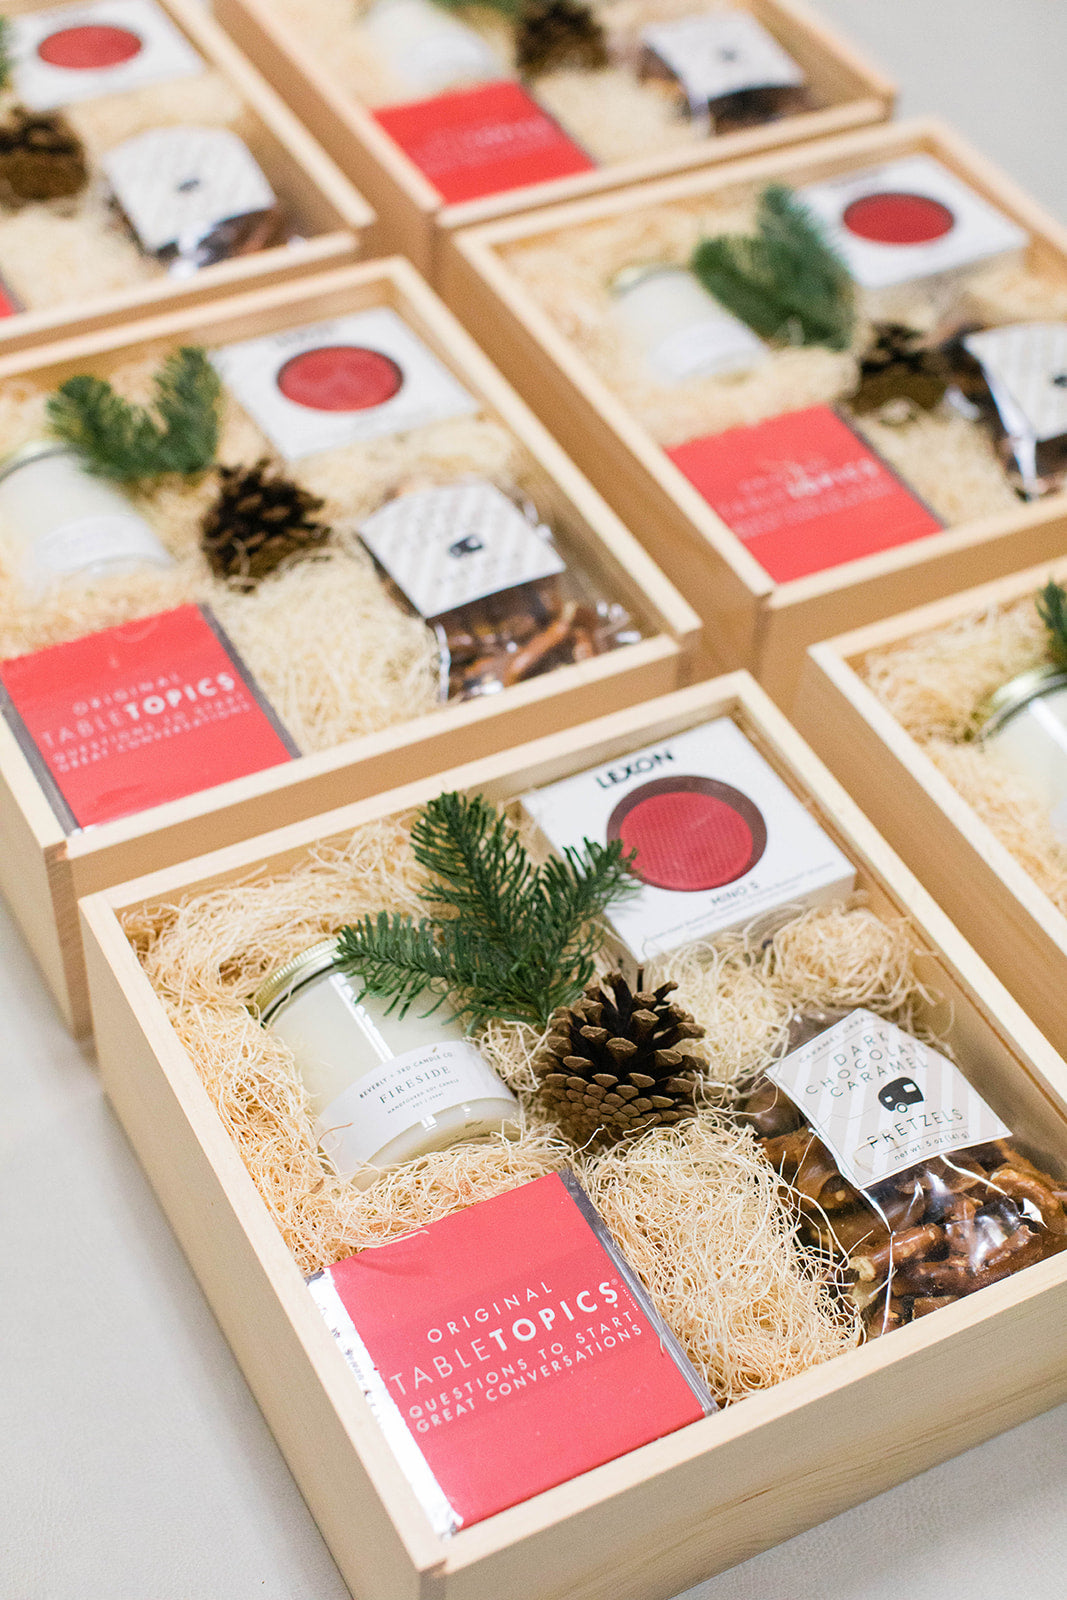 Gift Boxes 101: Easy DIY Steps for Creative Gift Box Ideas